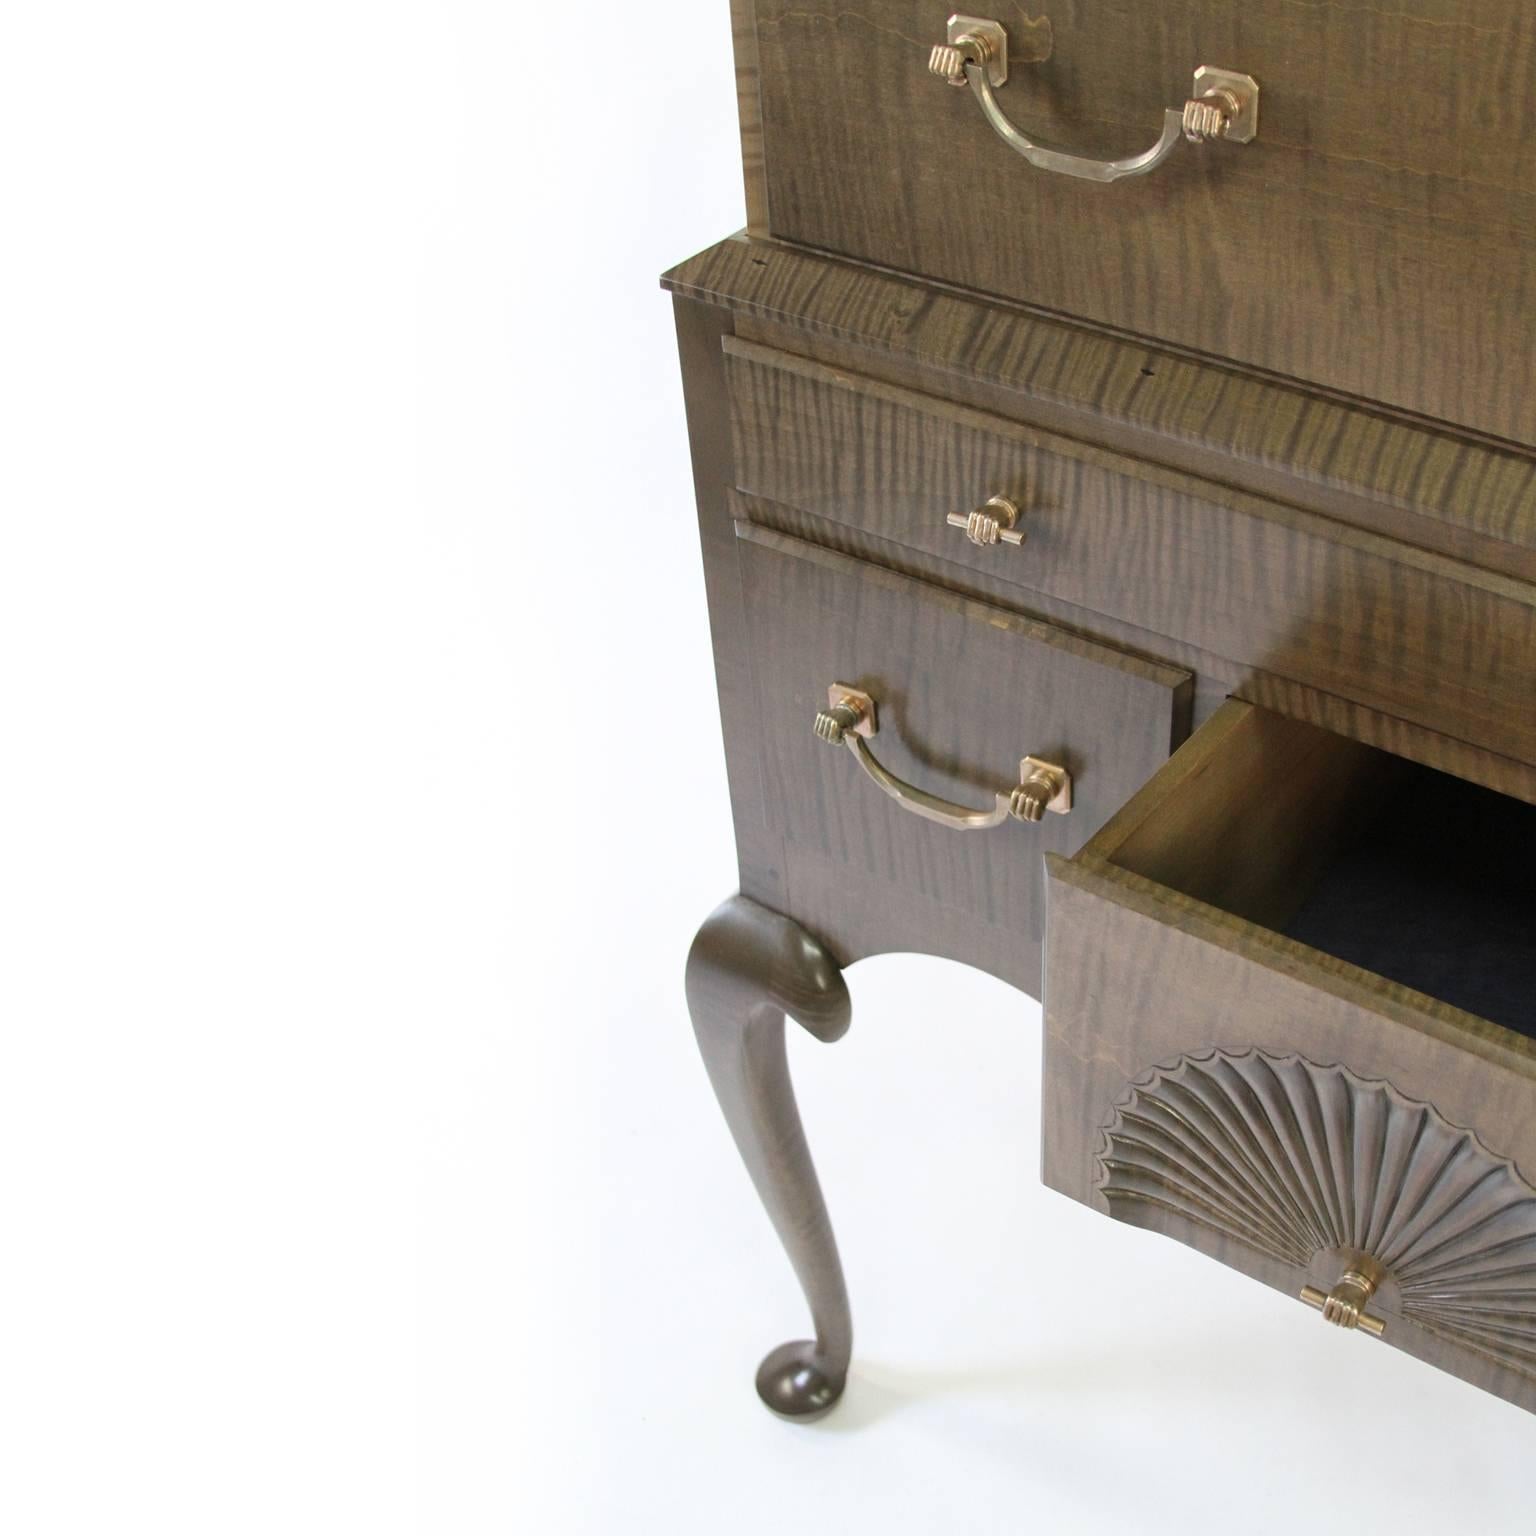 O&G Studio's take on the 18th century Connecticut style highboy. This piece combines a stunning signature stain finish over solid tiger maple. Other details include hand-carved fans and legs, dovetailed drawers and custom O&G bronze fist hardware. A